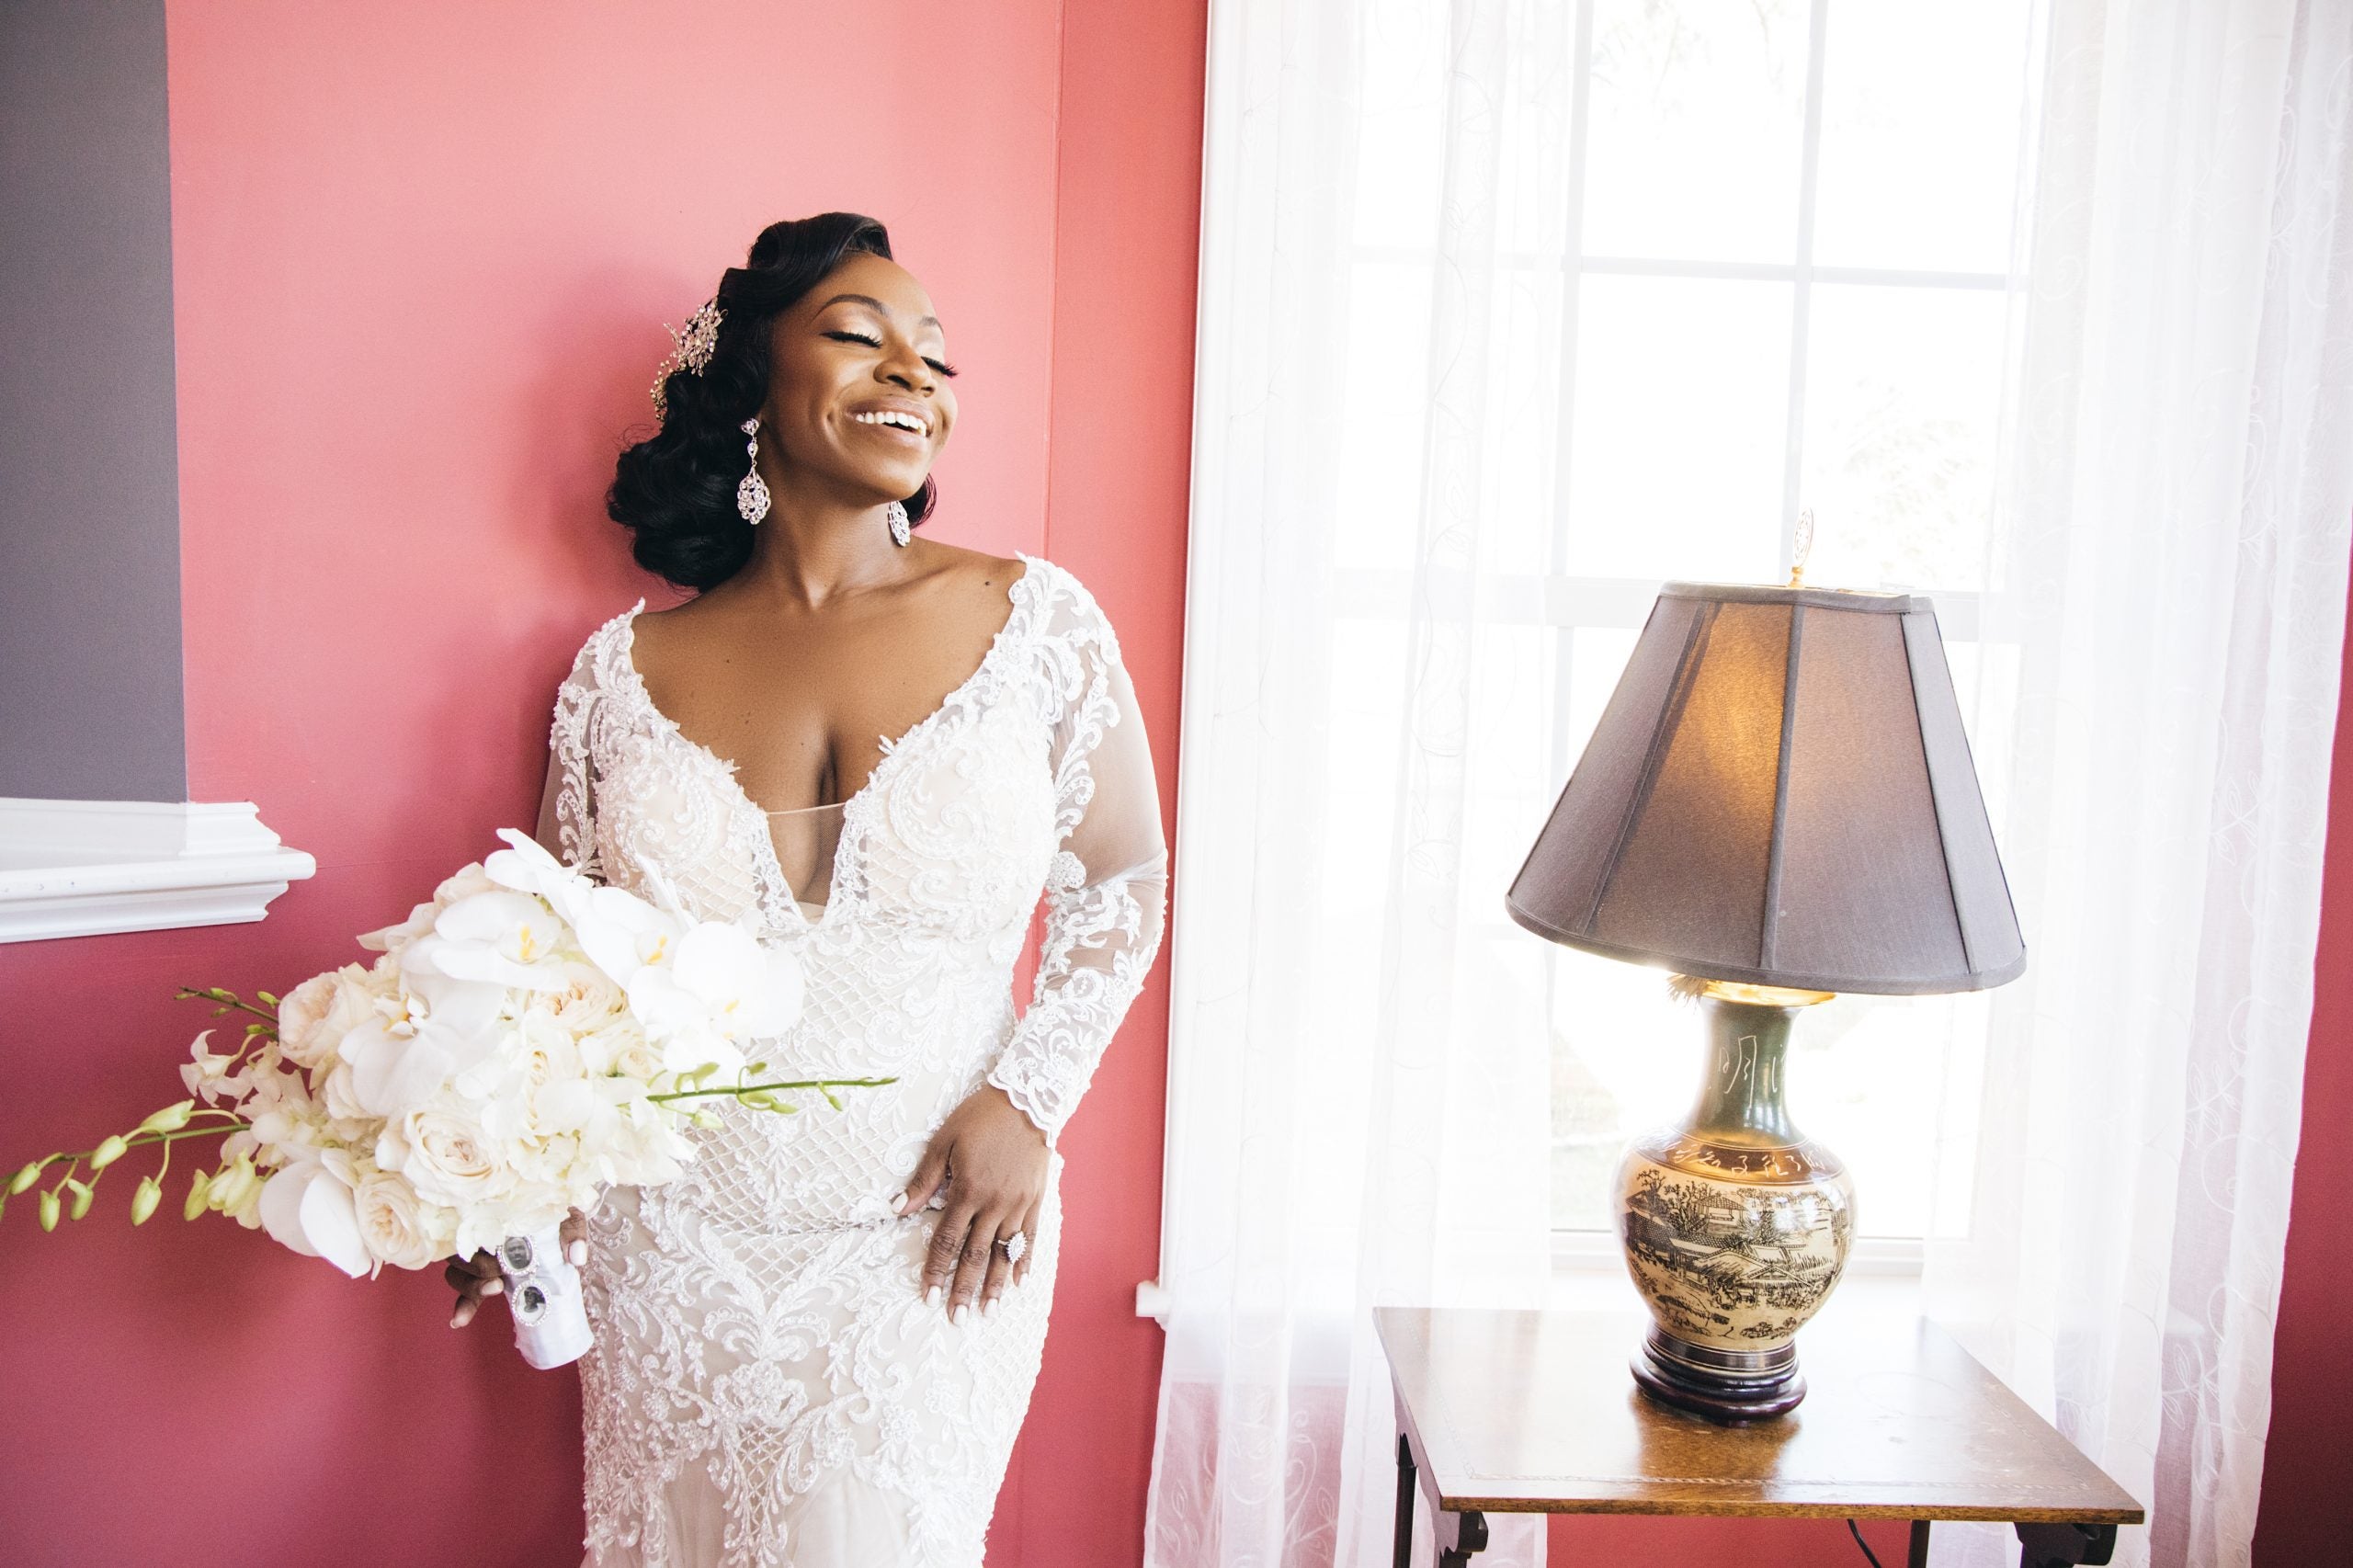 Bridal Bliss: Mia And William Had Plenty Surprises At Their Upscale Glam Wedding